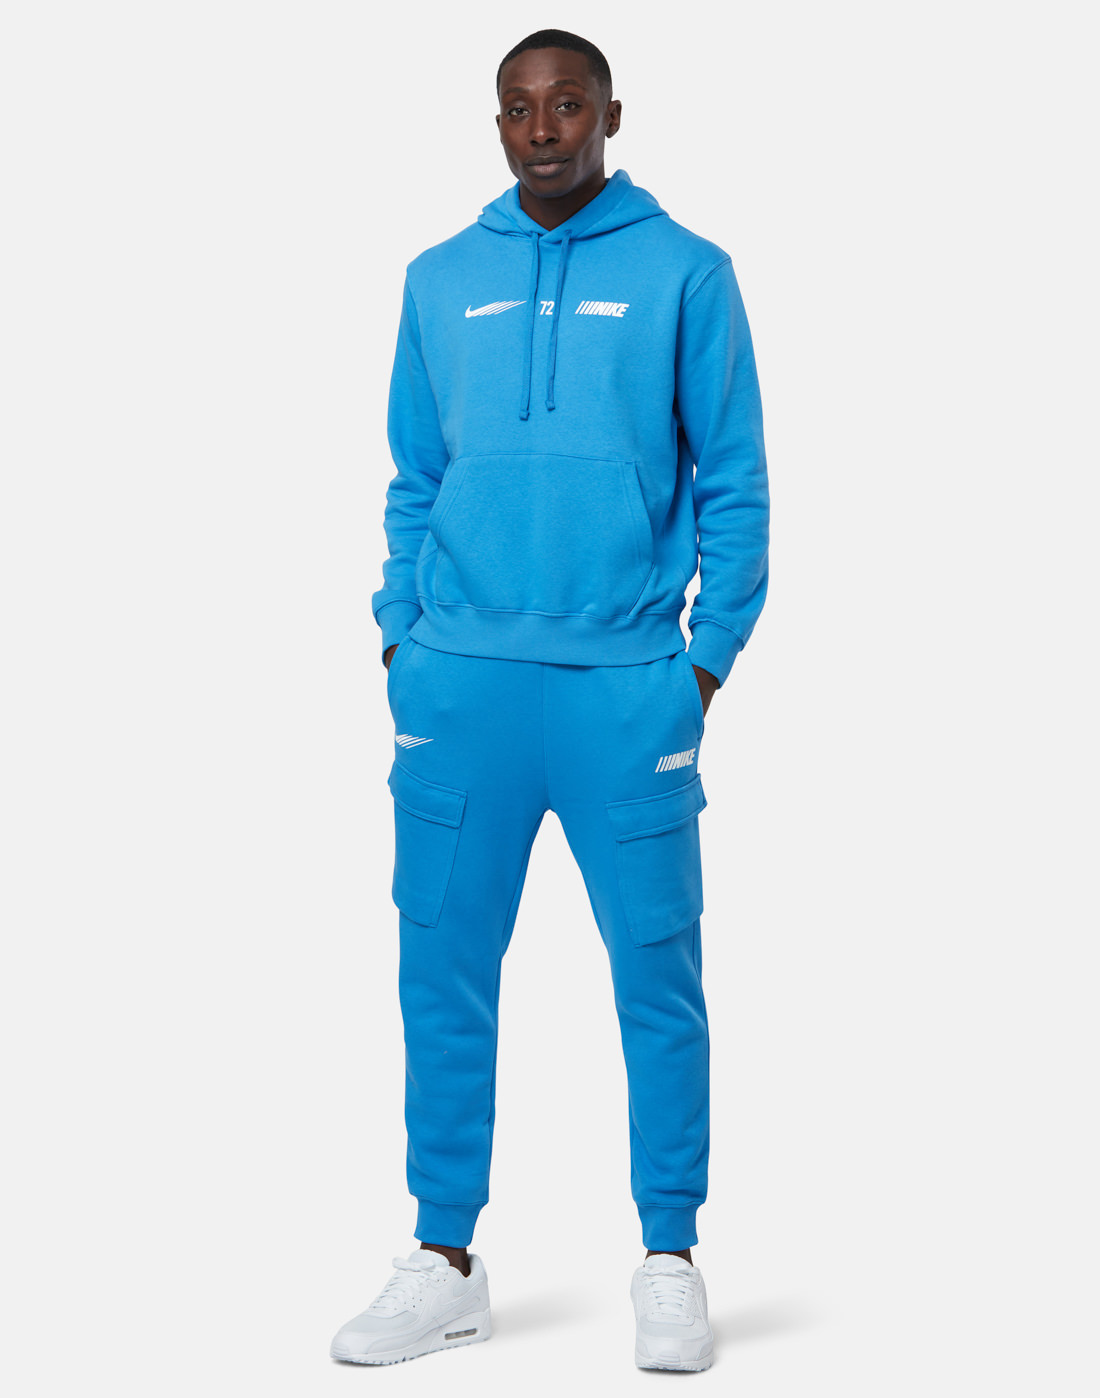 Nike Mens Sports Inspired Hoodies - Blue | Life Style Sports IE